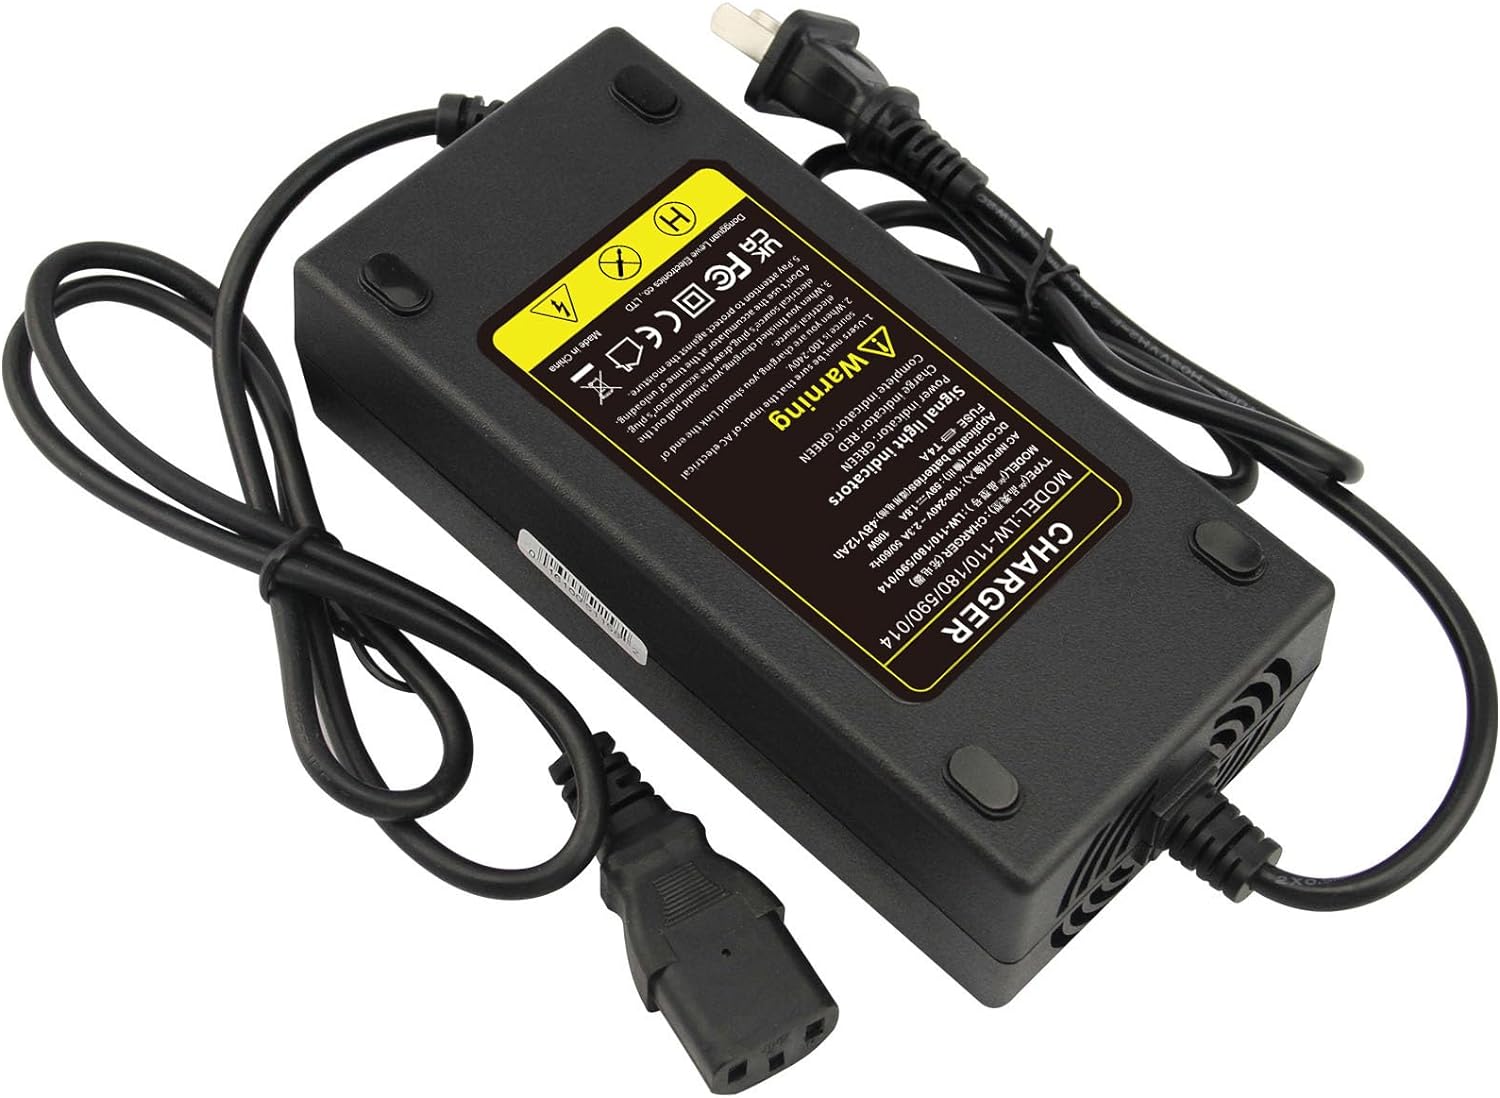 48V 12AH Lead Acid Battery Charger for Electric Bicycle Motor Bike - 3 Holes Plug AC Adapter Battery Cell Composition L